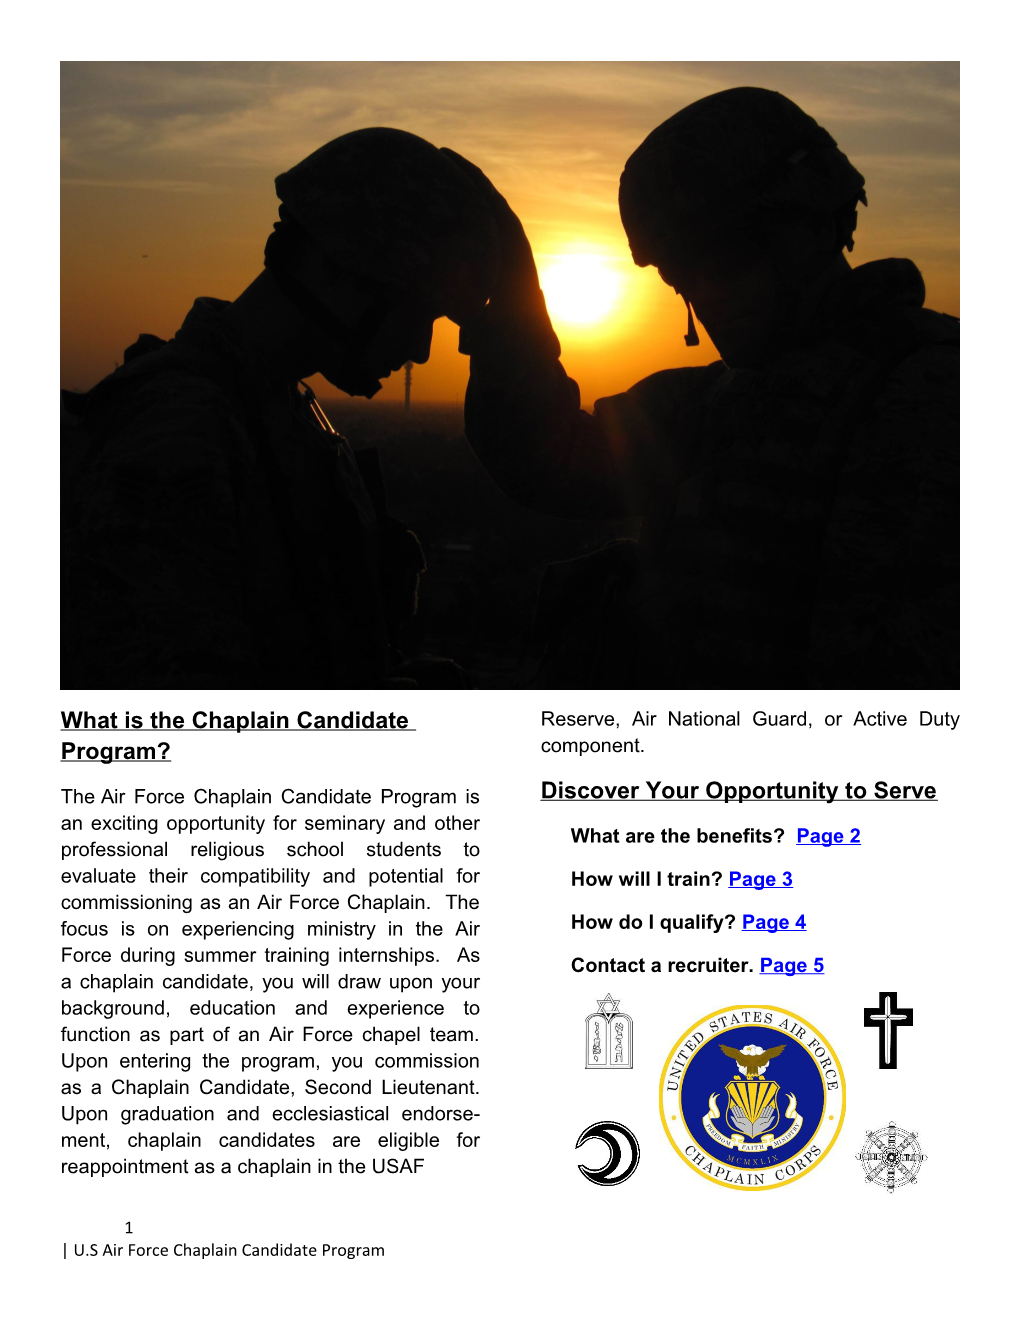 What Is the Chaplain Candidate Program?